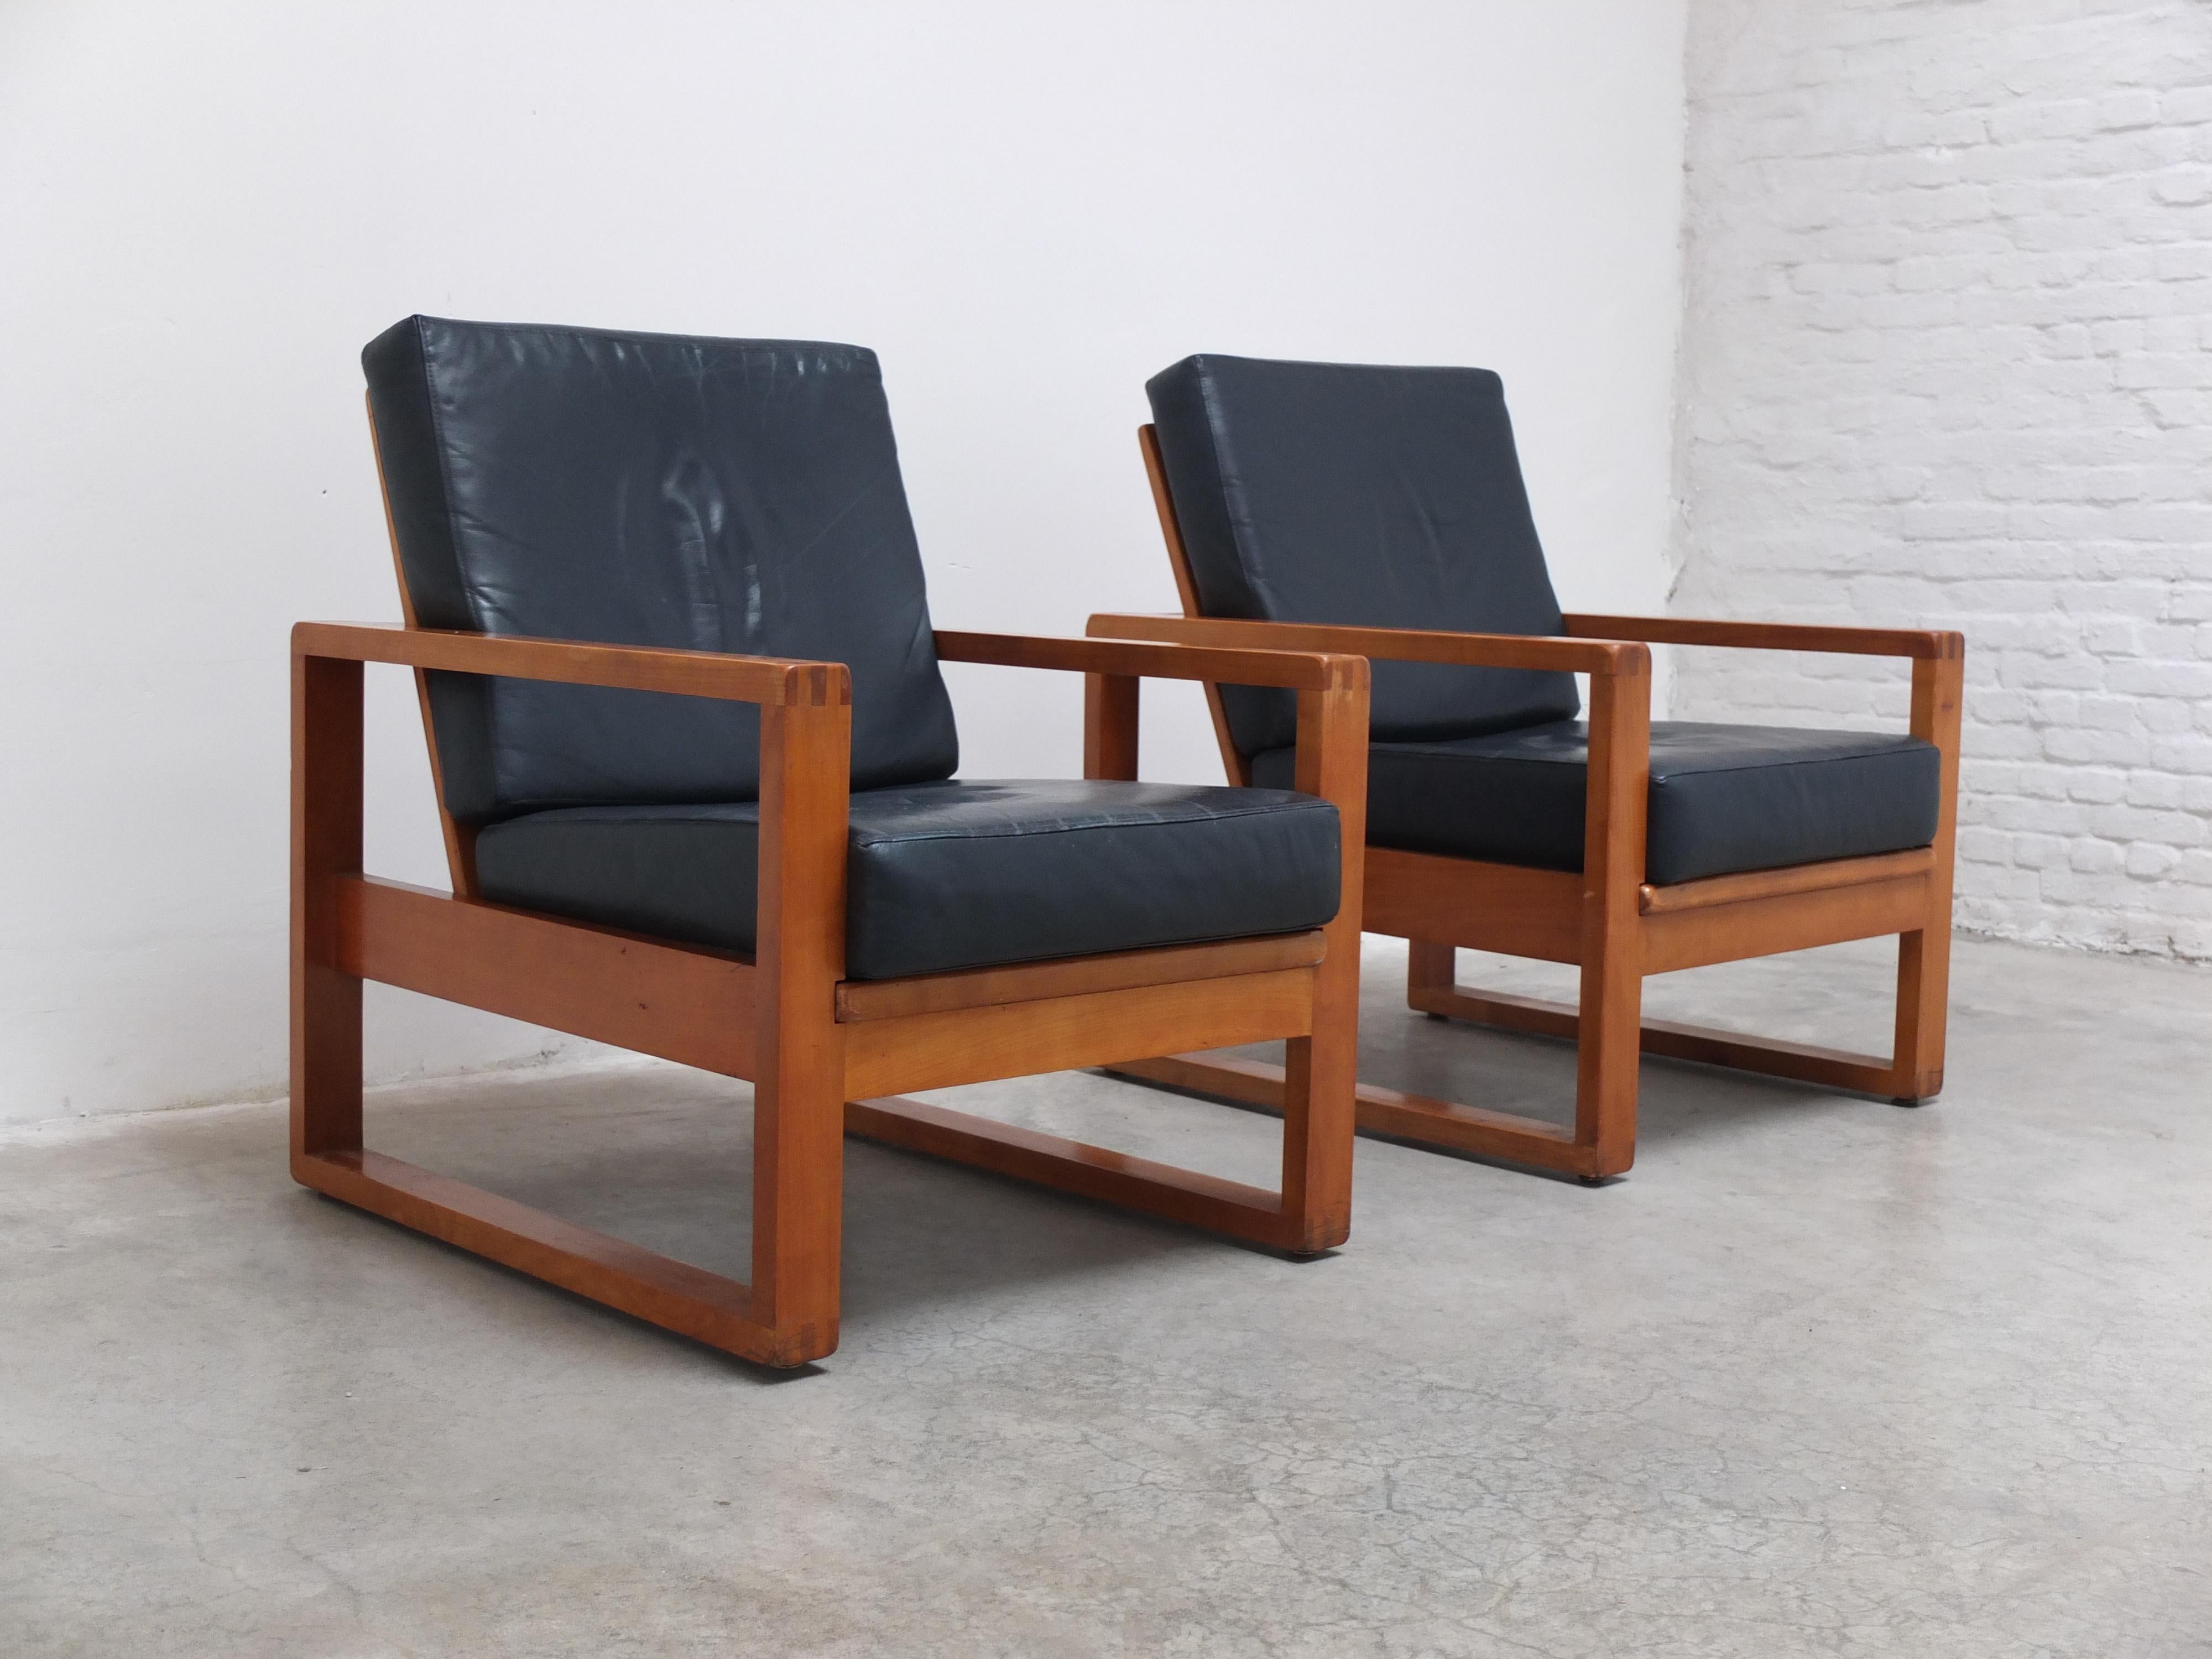 Unique Pair of Modernist Lounge Chairs by Van Den Berghe-Pauvers, 1960s In Good Condition For Sale In Antwerpen, VAN